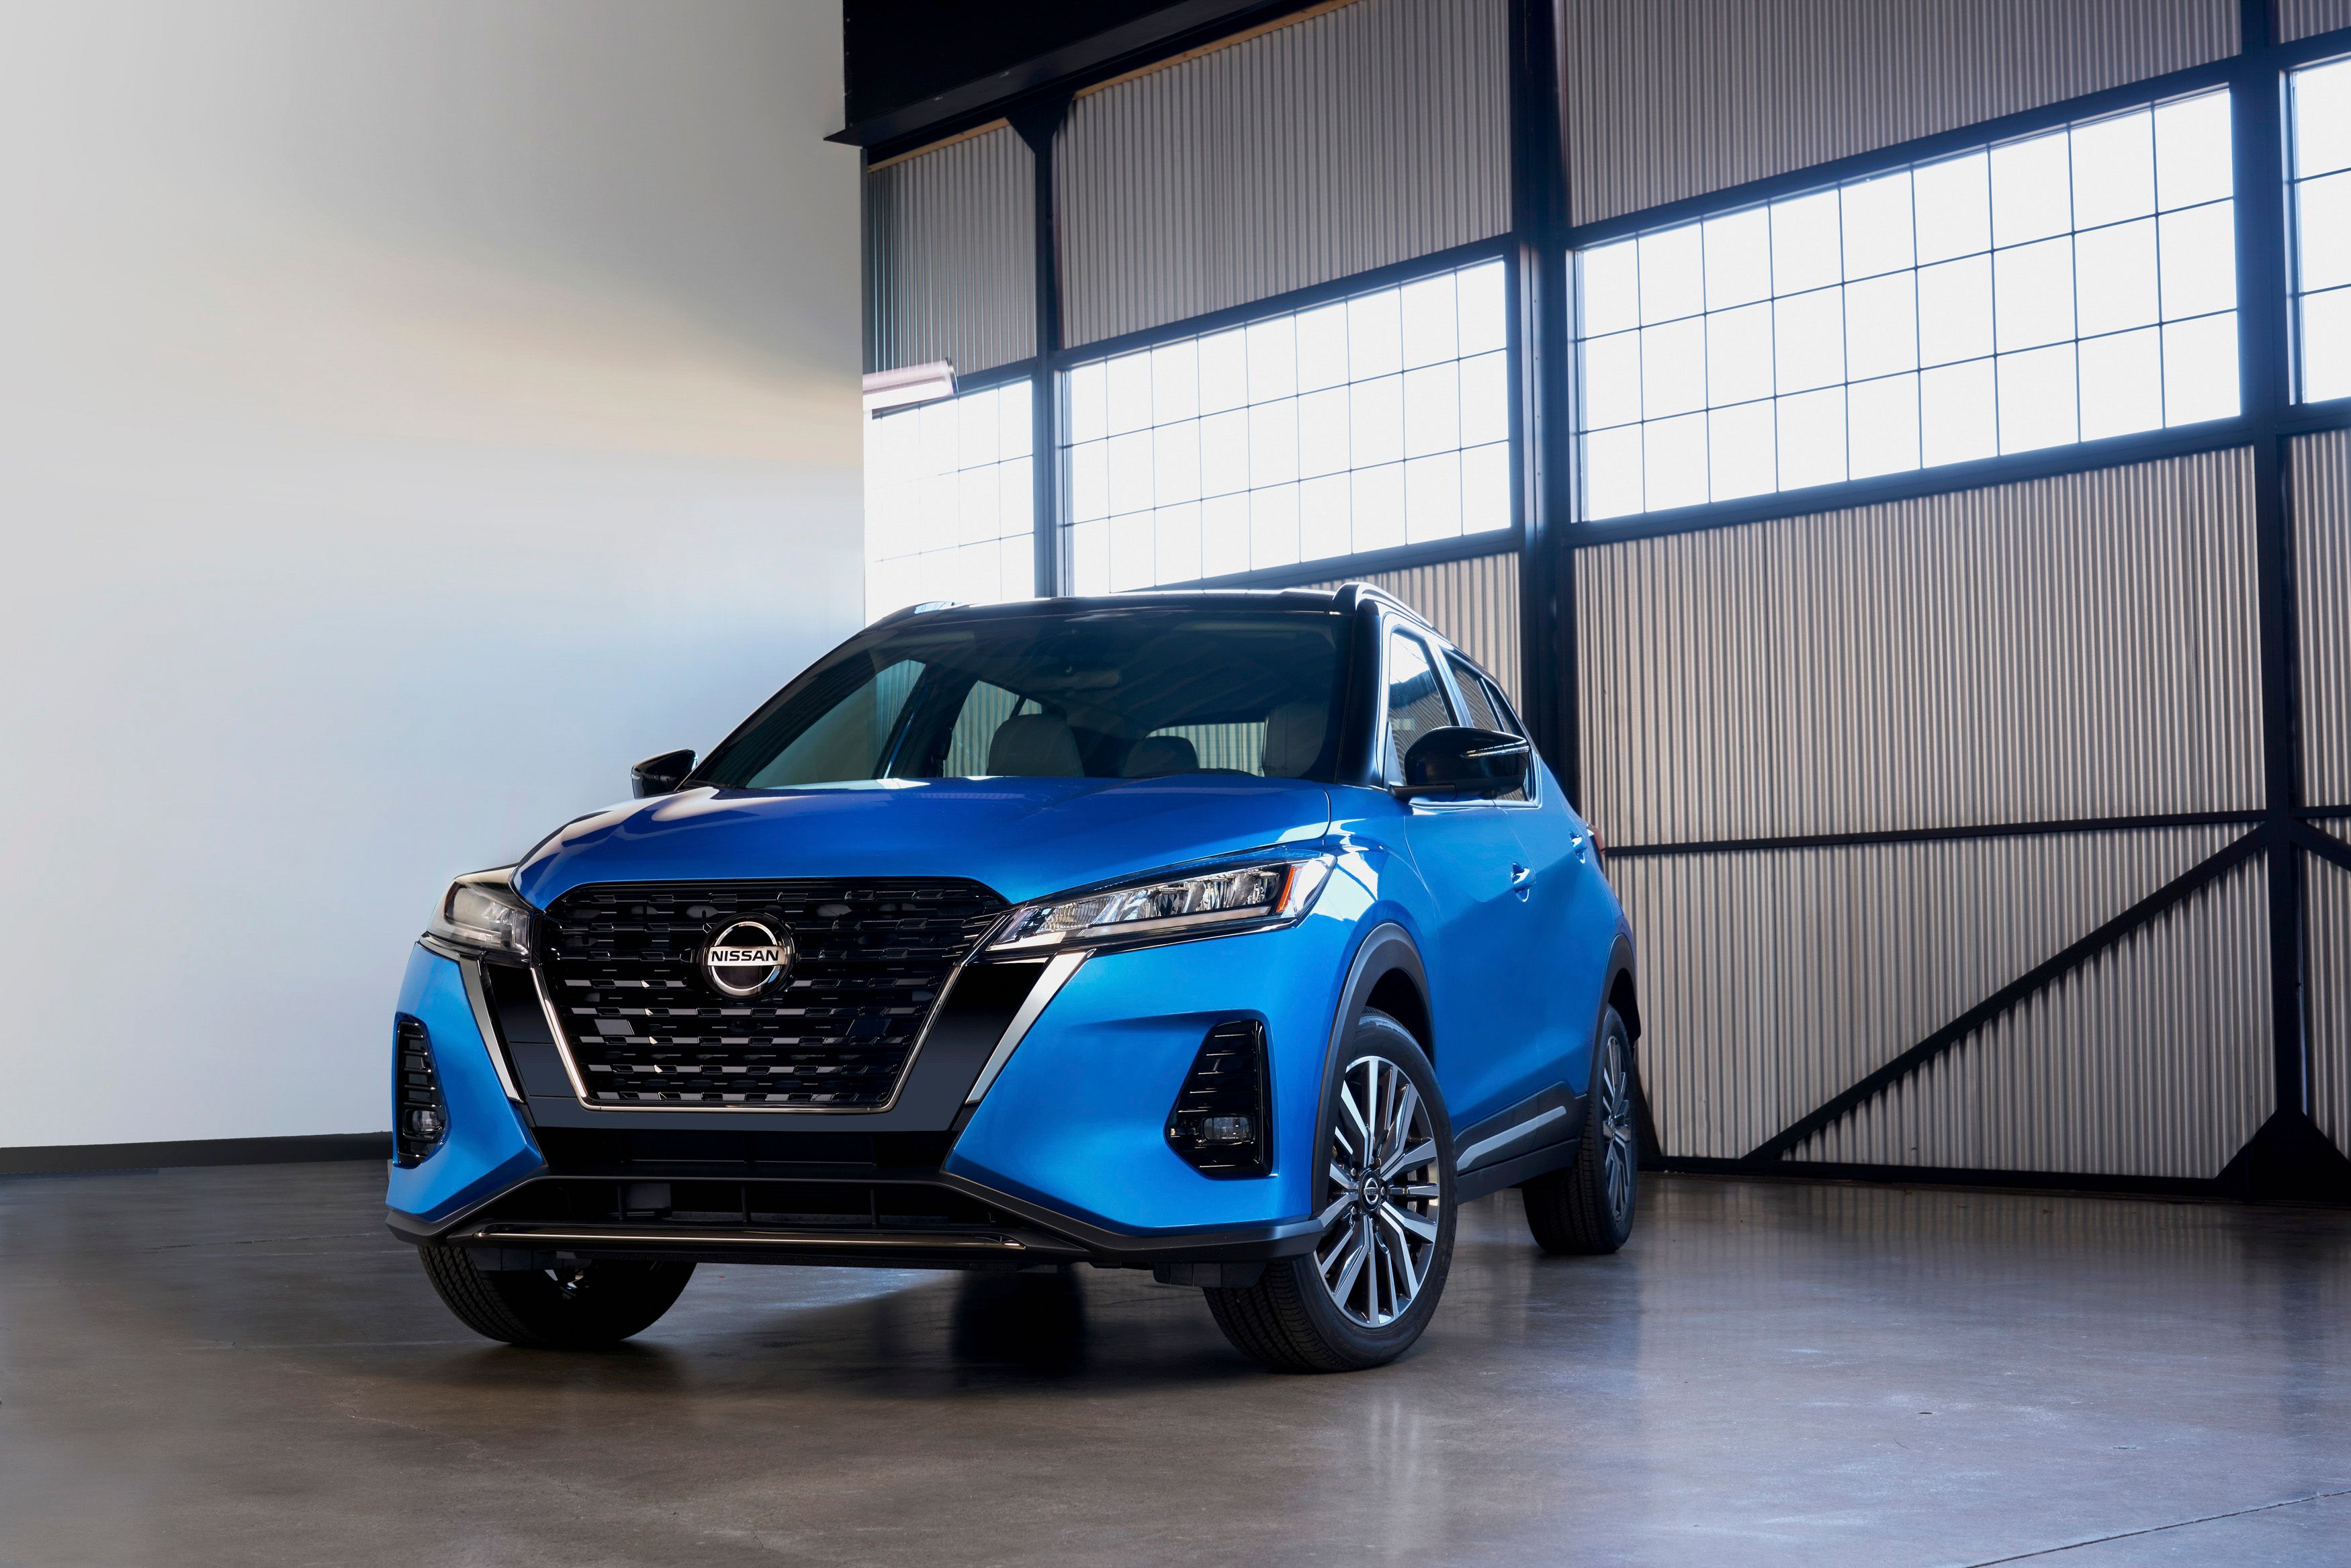 2020 If You Didn't Like The NIssan Kicks, You MIght Want to Look Again